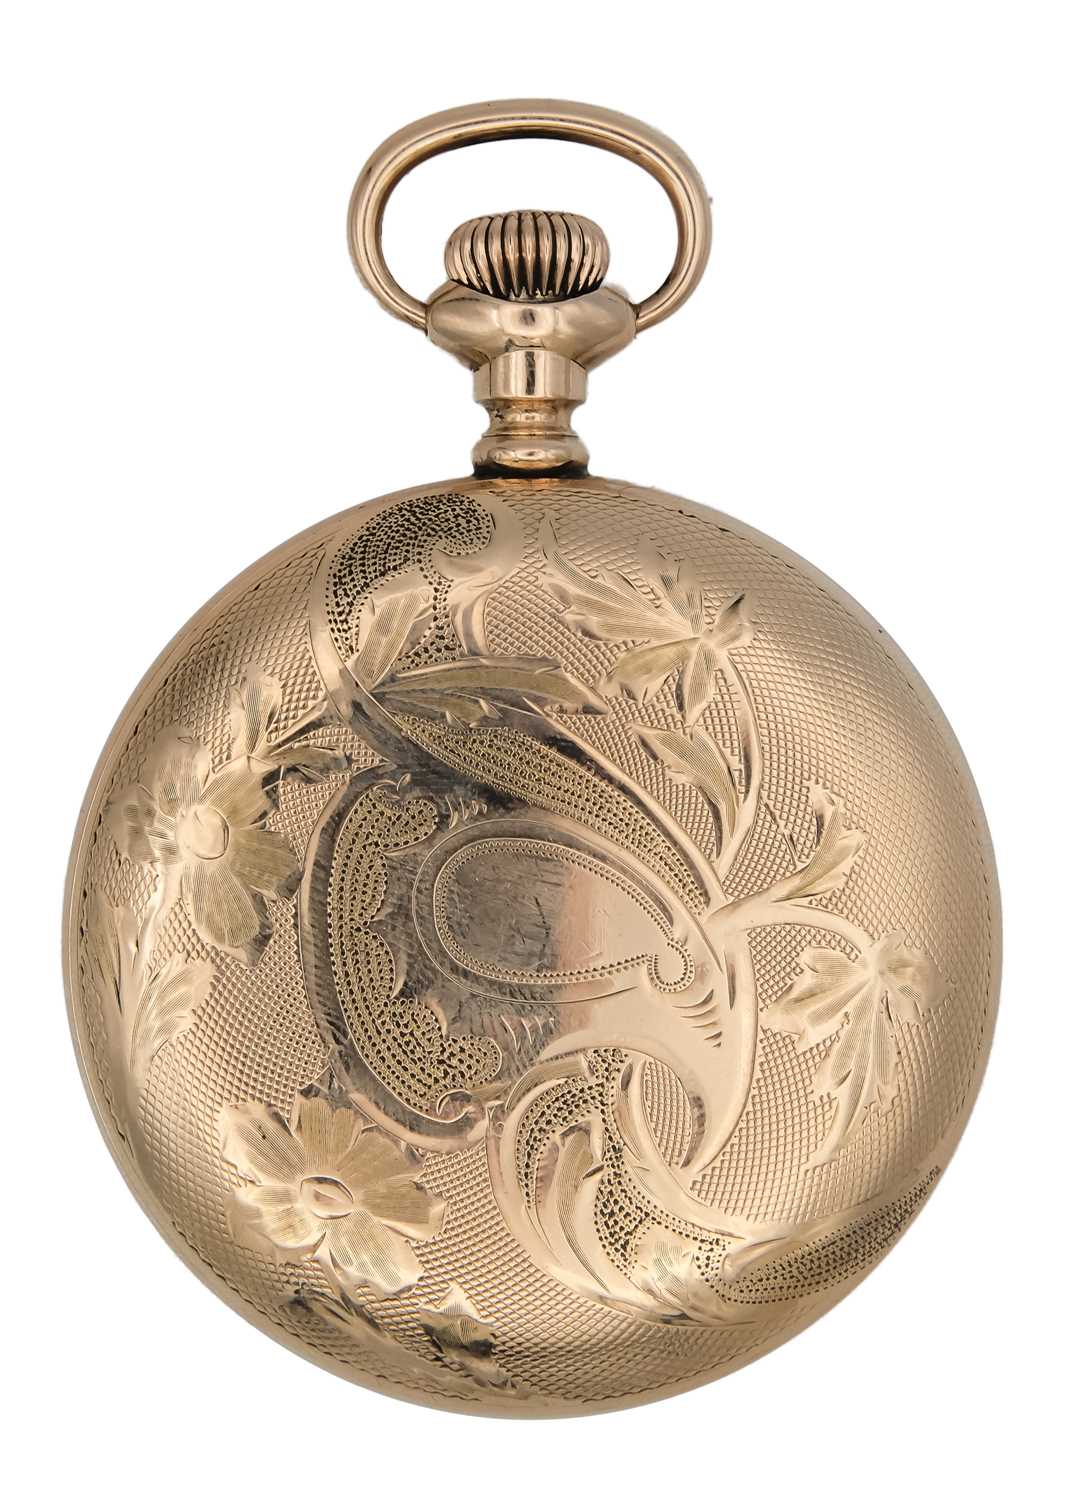 ELGIN - A rose gold plated crown wind lever pocket watch. - Image 2 of 2